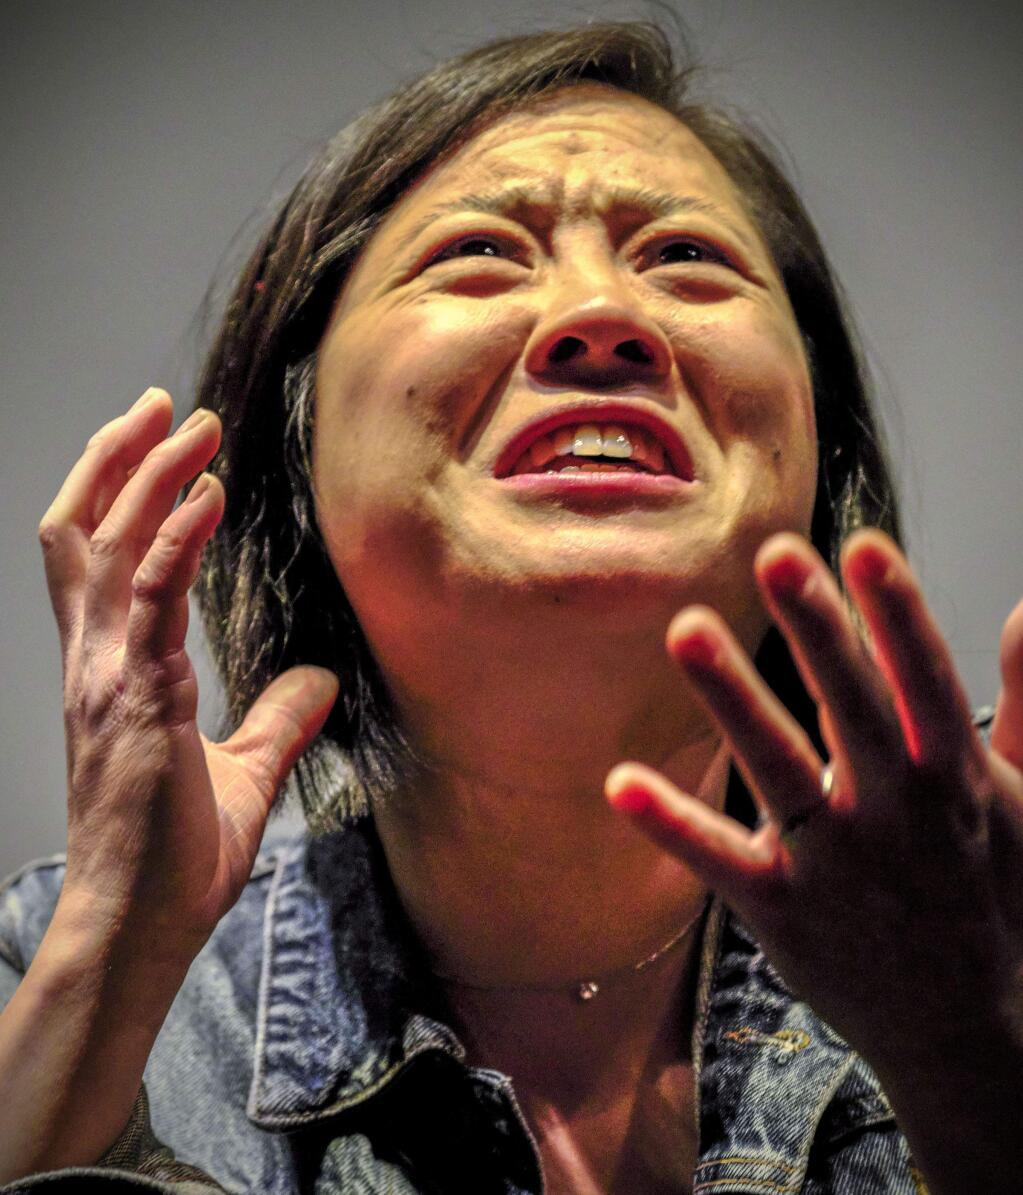 Susan Lieu performs her one-woman show “140 lbs: How Beauty Killed My Mother,” May 19 at The Marsh in San Francisco. (JEFF KAN LEE)